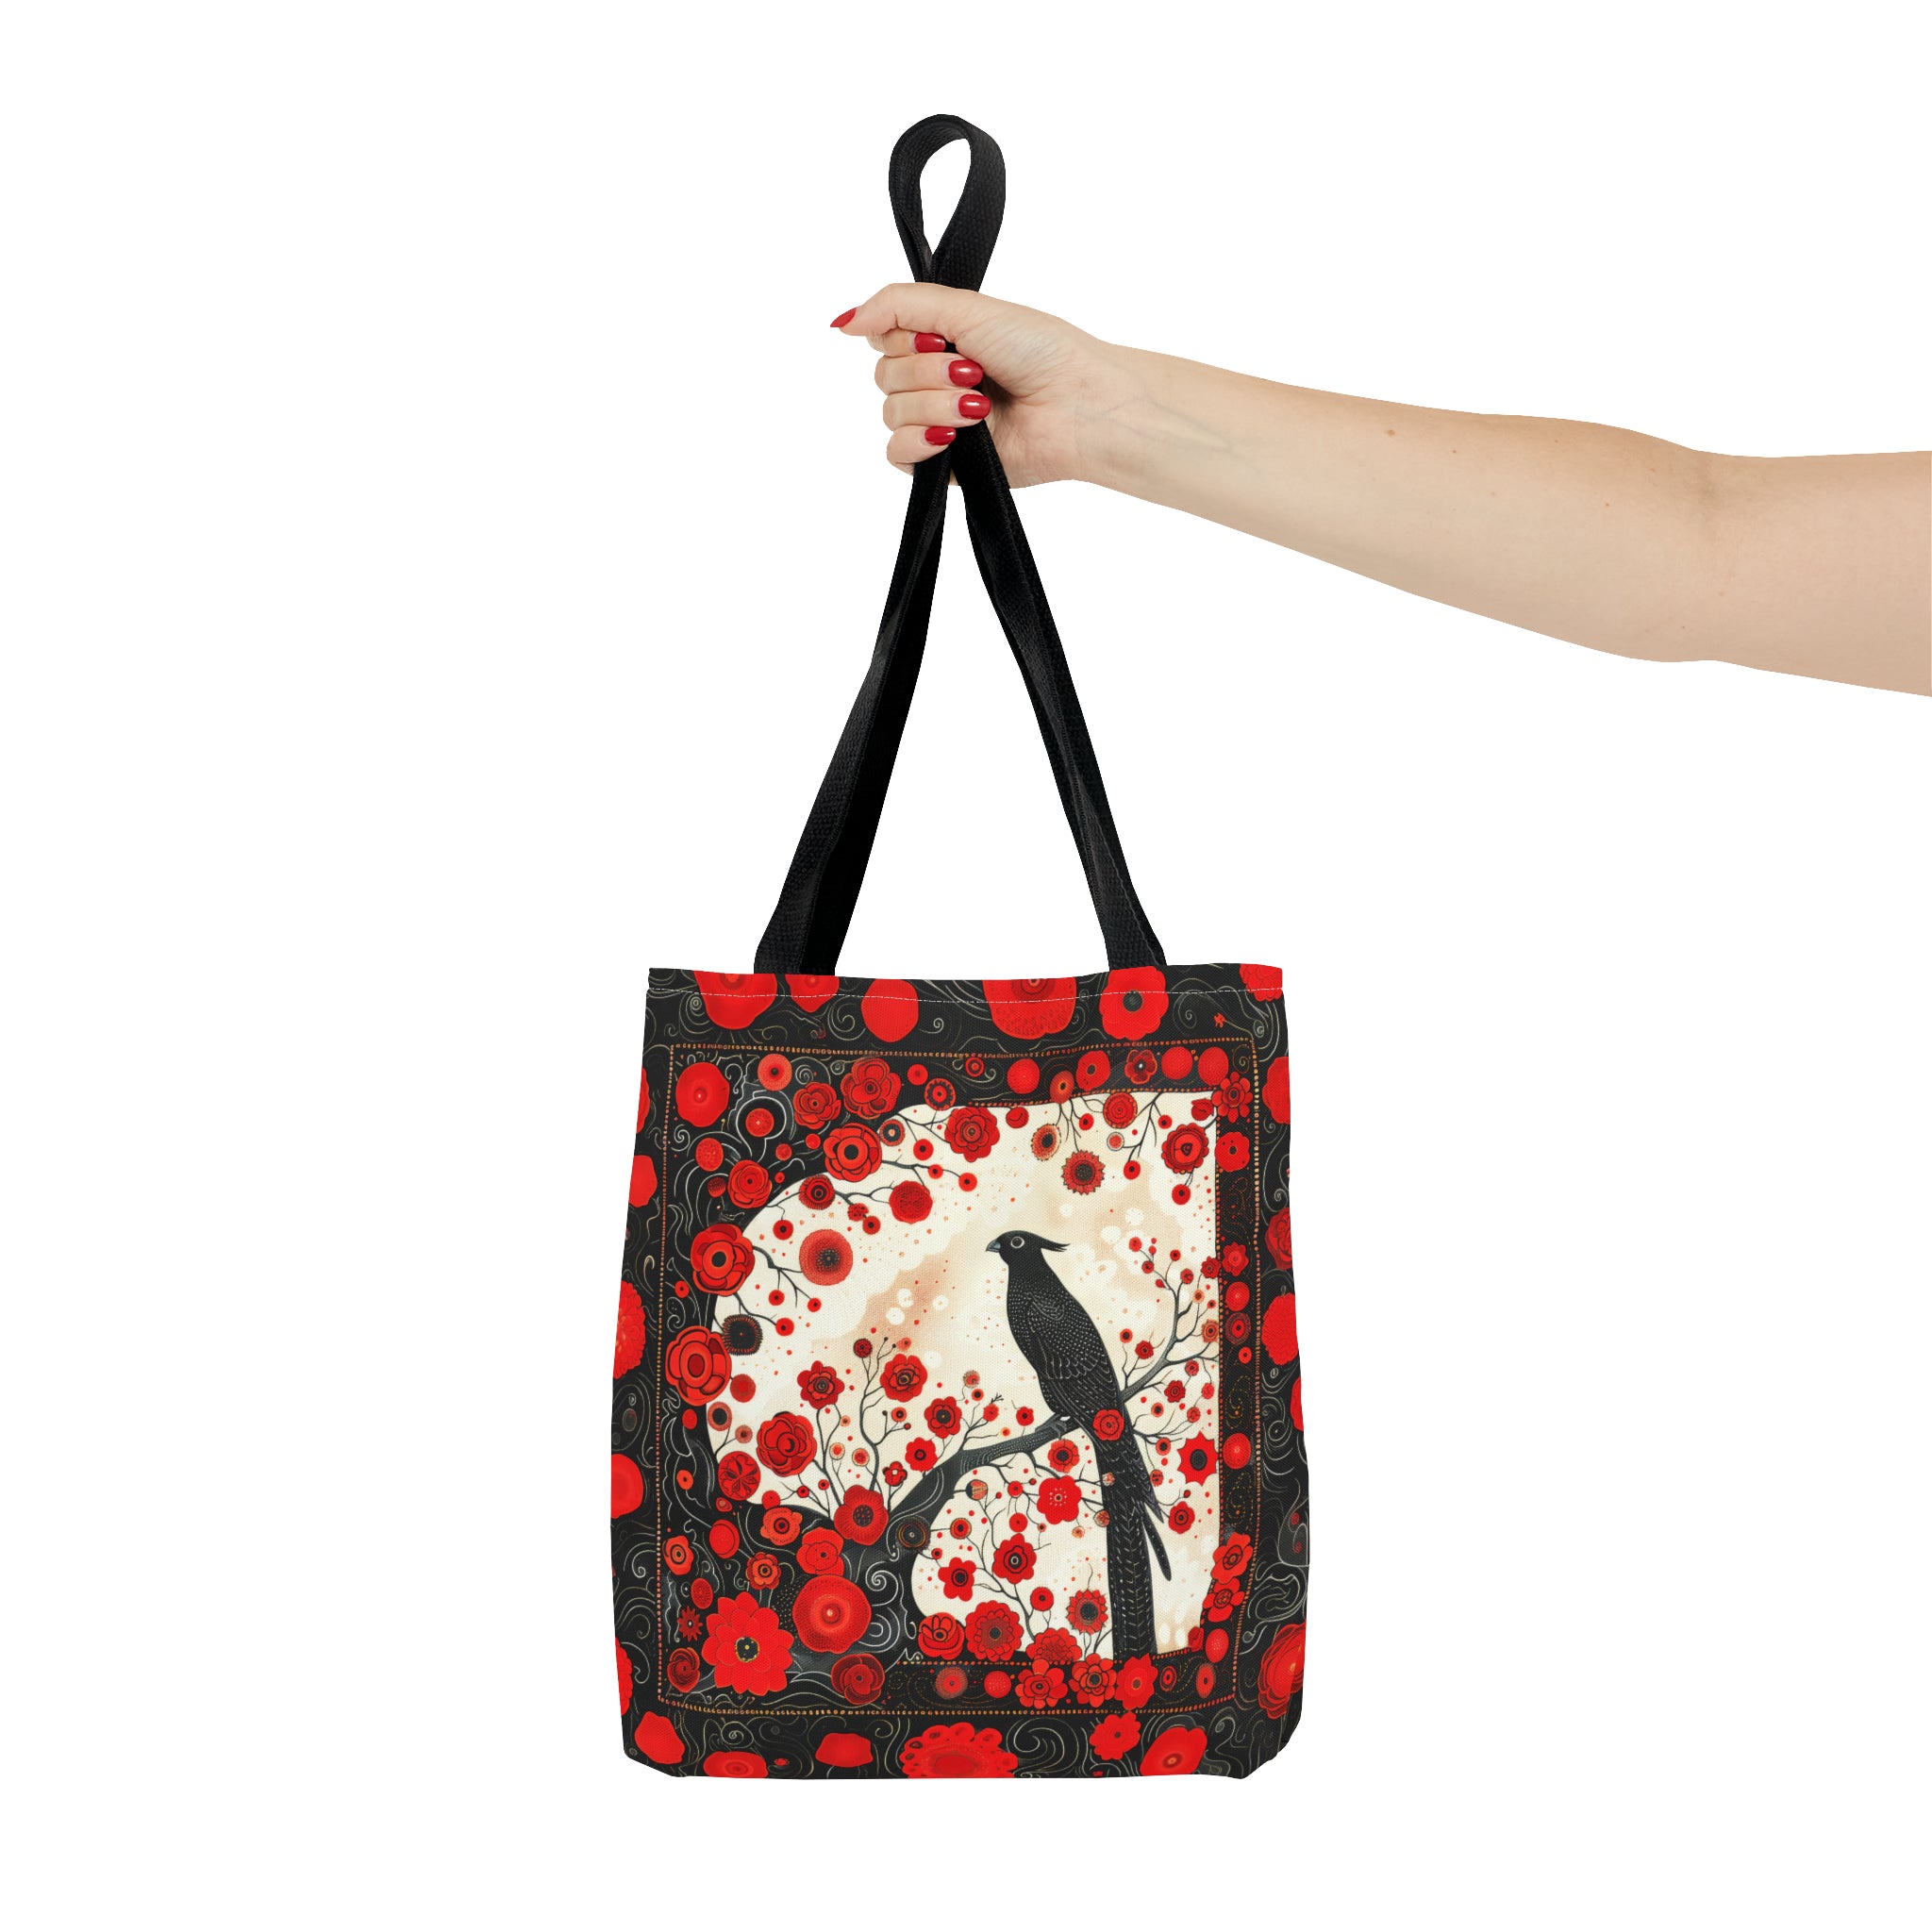 Canvas Tote Bag, vintage inspired bird design with red flowers, vibrant artistic accessory, whimsical all over print bag in three sizes